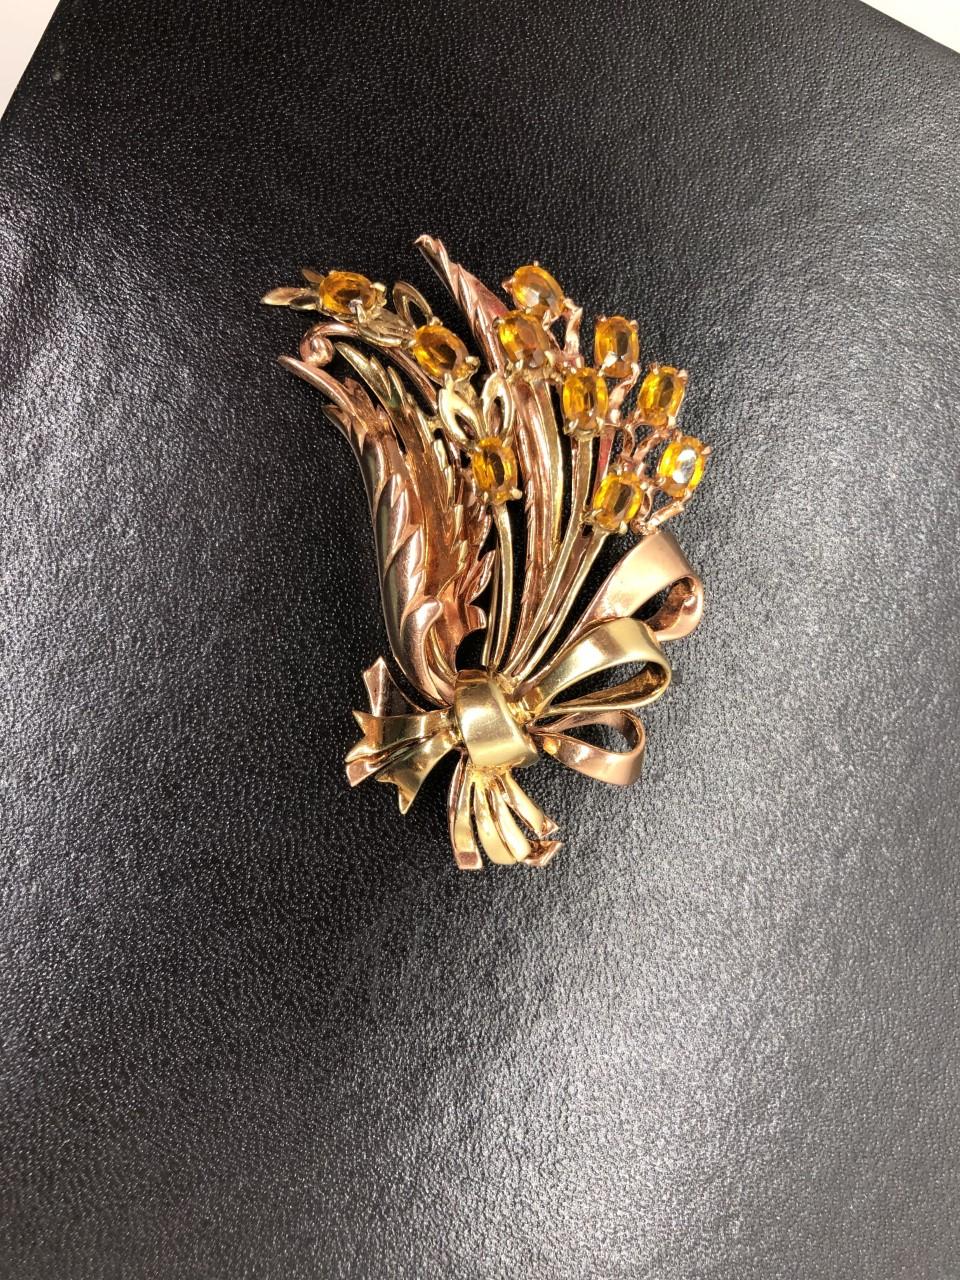 Circa 1940, 14k rose and yellow gold brooch, designed as a bow tied spray of citrine flowers, with matching earrings, signed R. DEROSA. Brooch, height 2 1/4 inches, total 40.9 grams